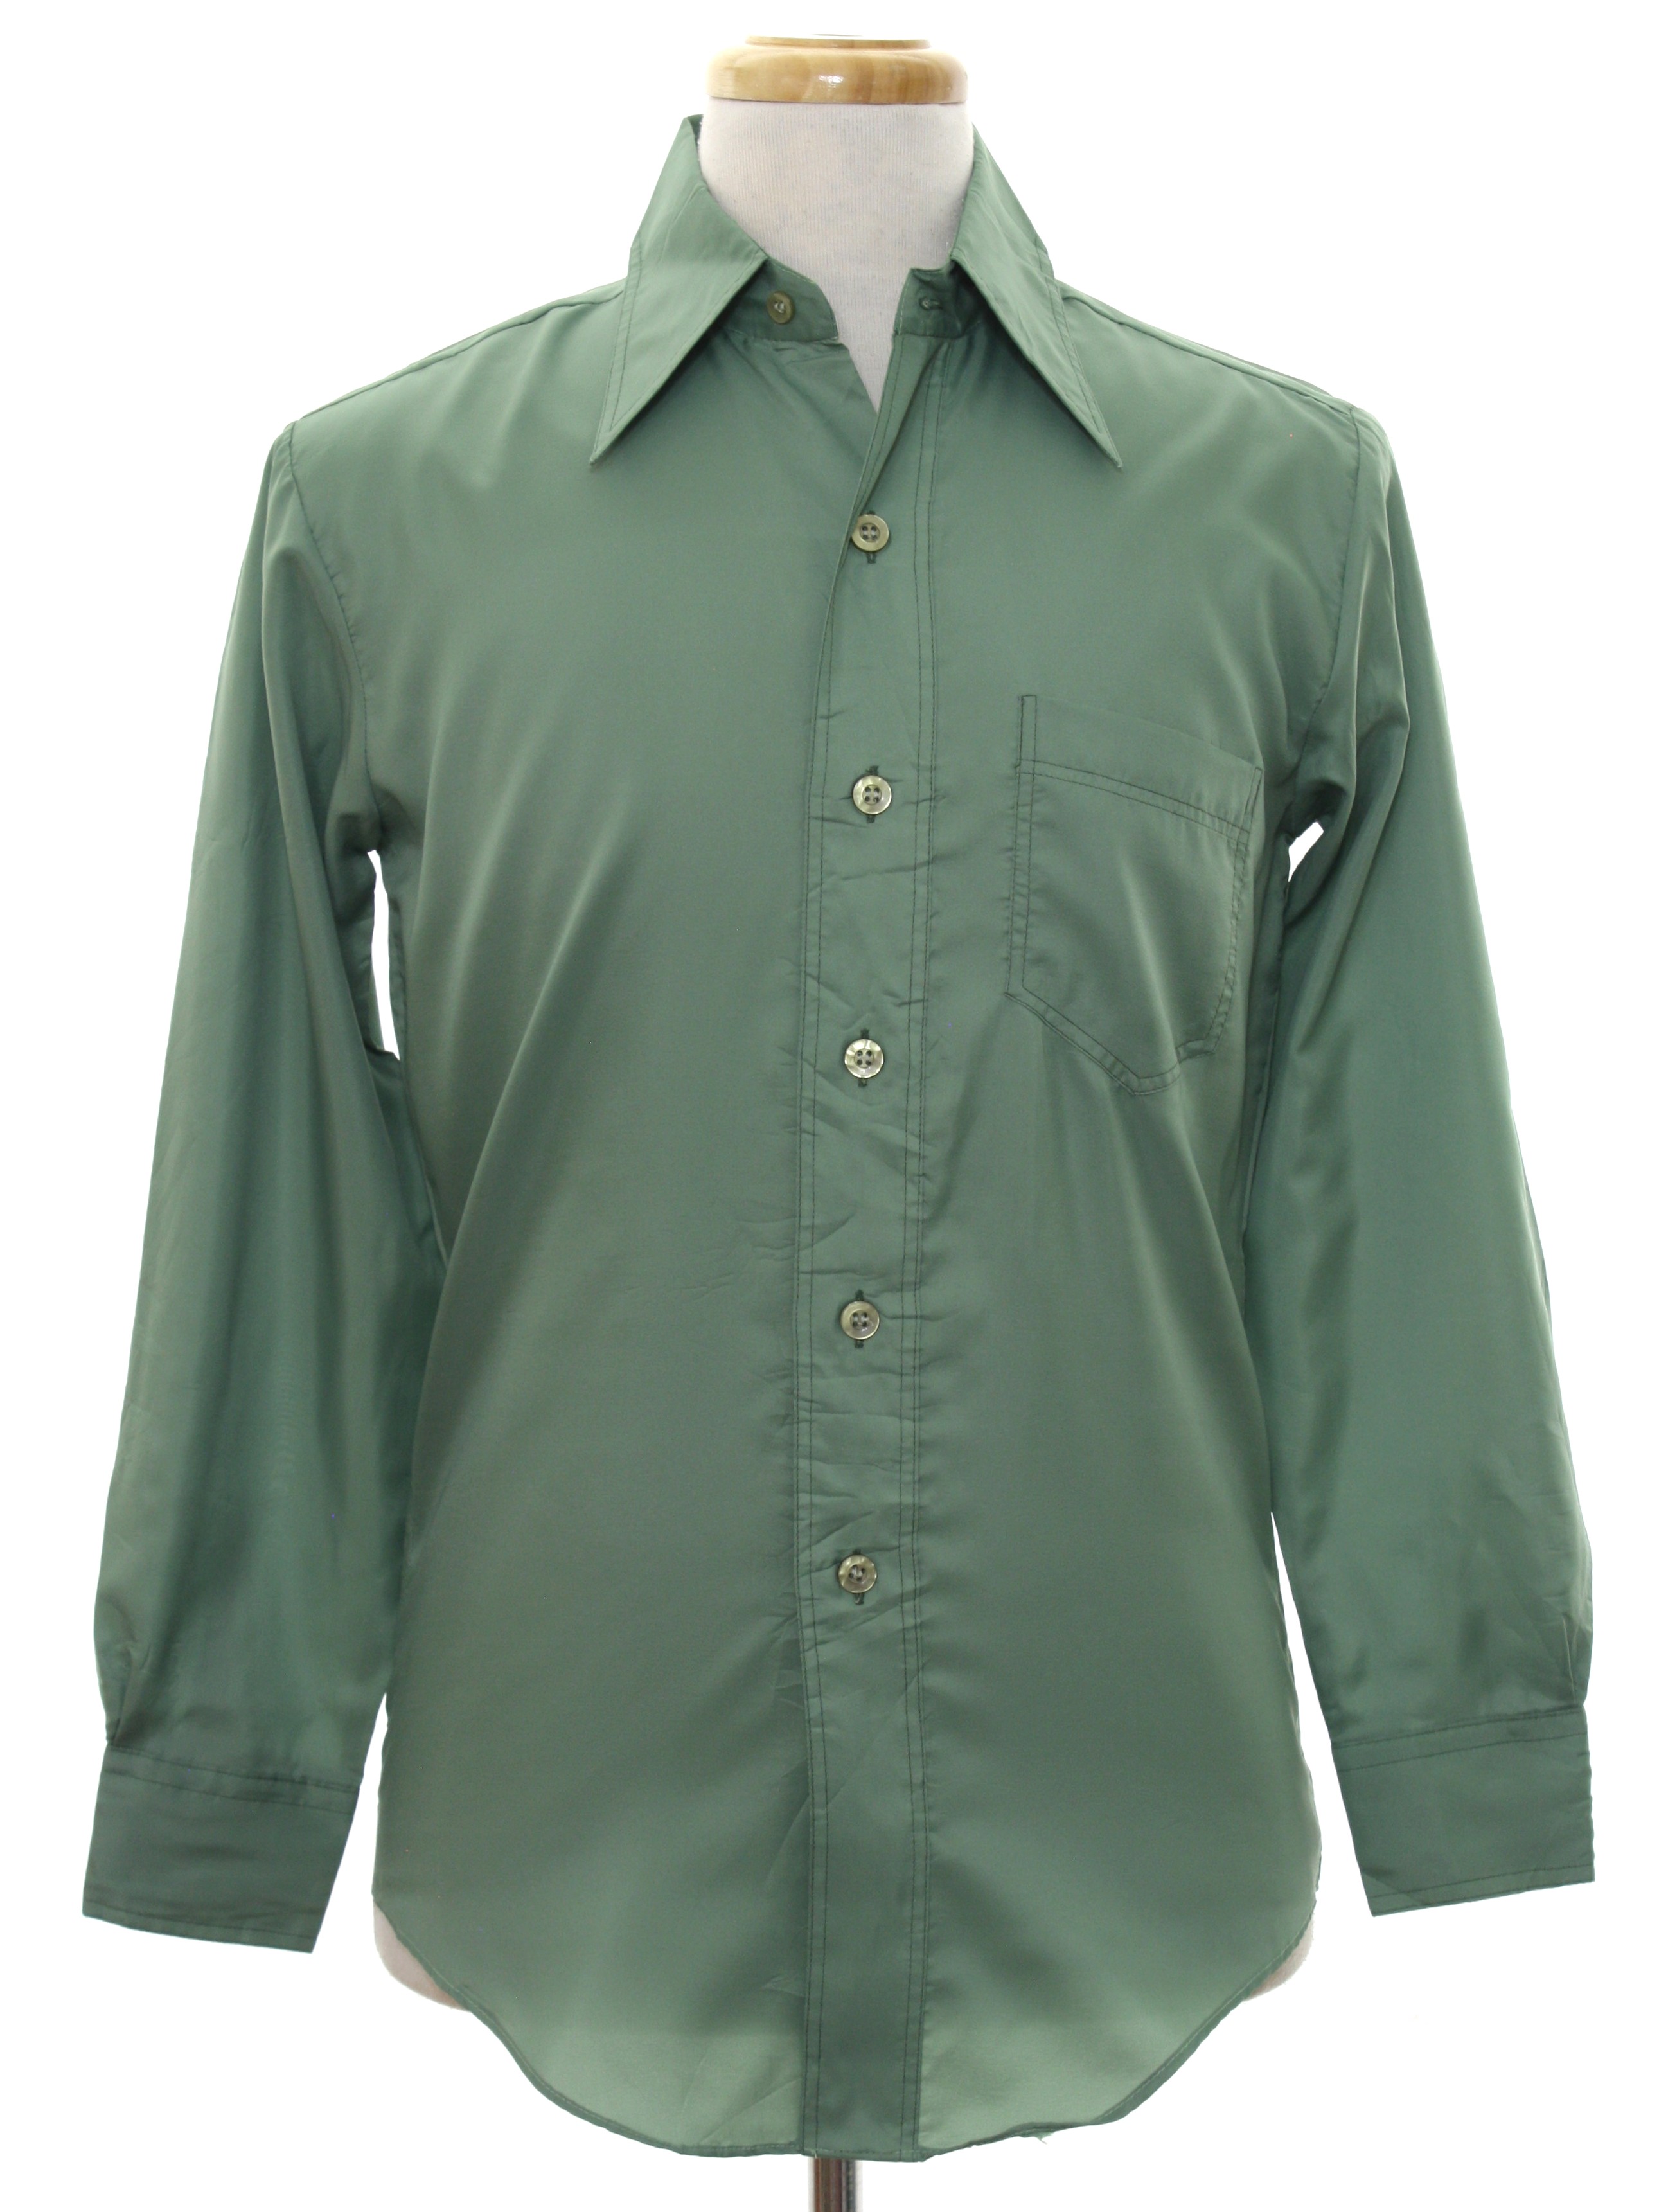 70s Retro Shirt: 70s -Cellini- Mens moss green silky polyester button ...